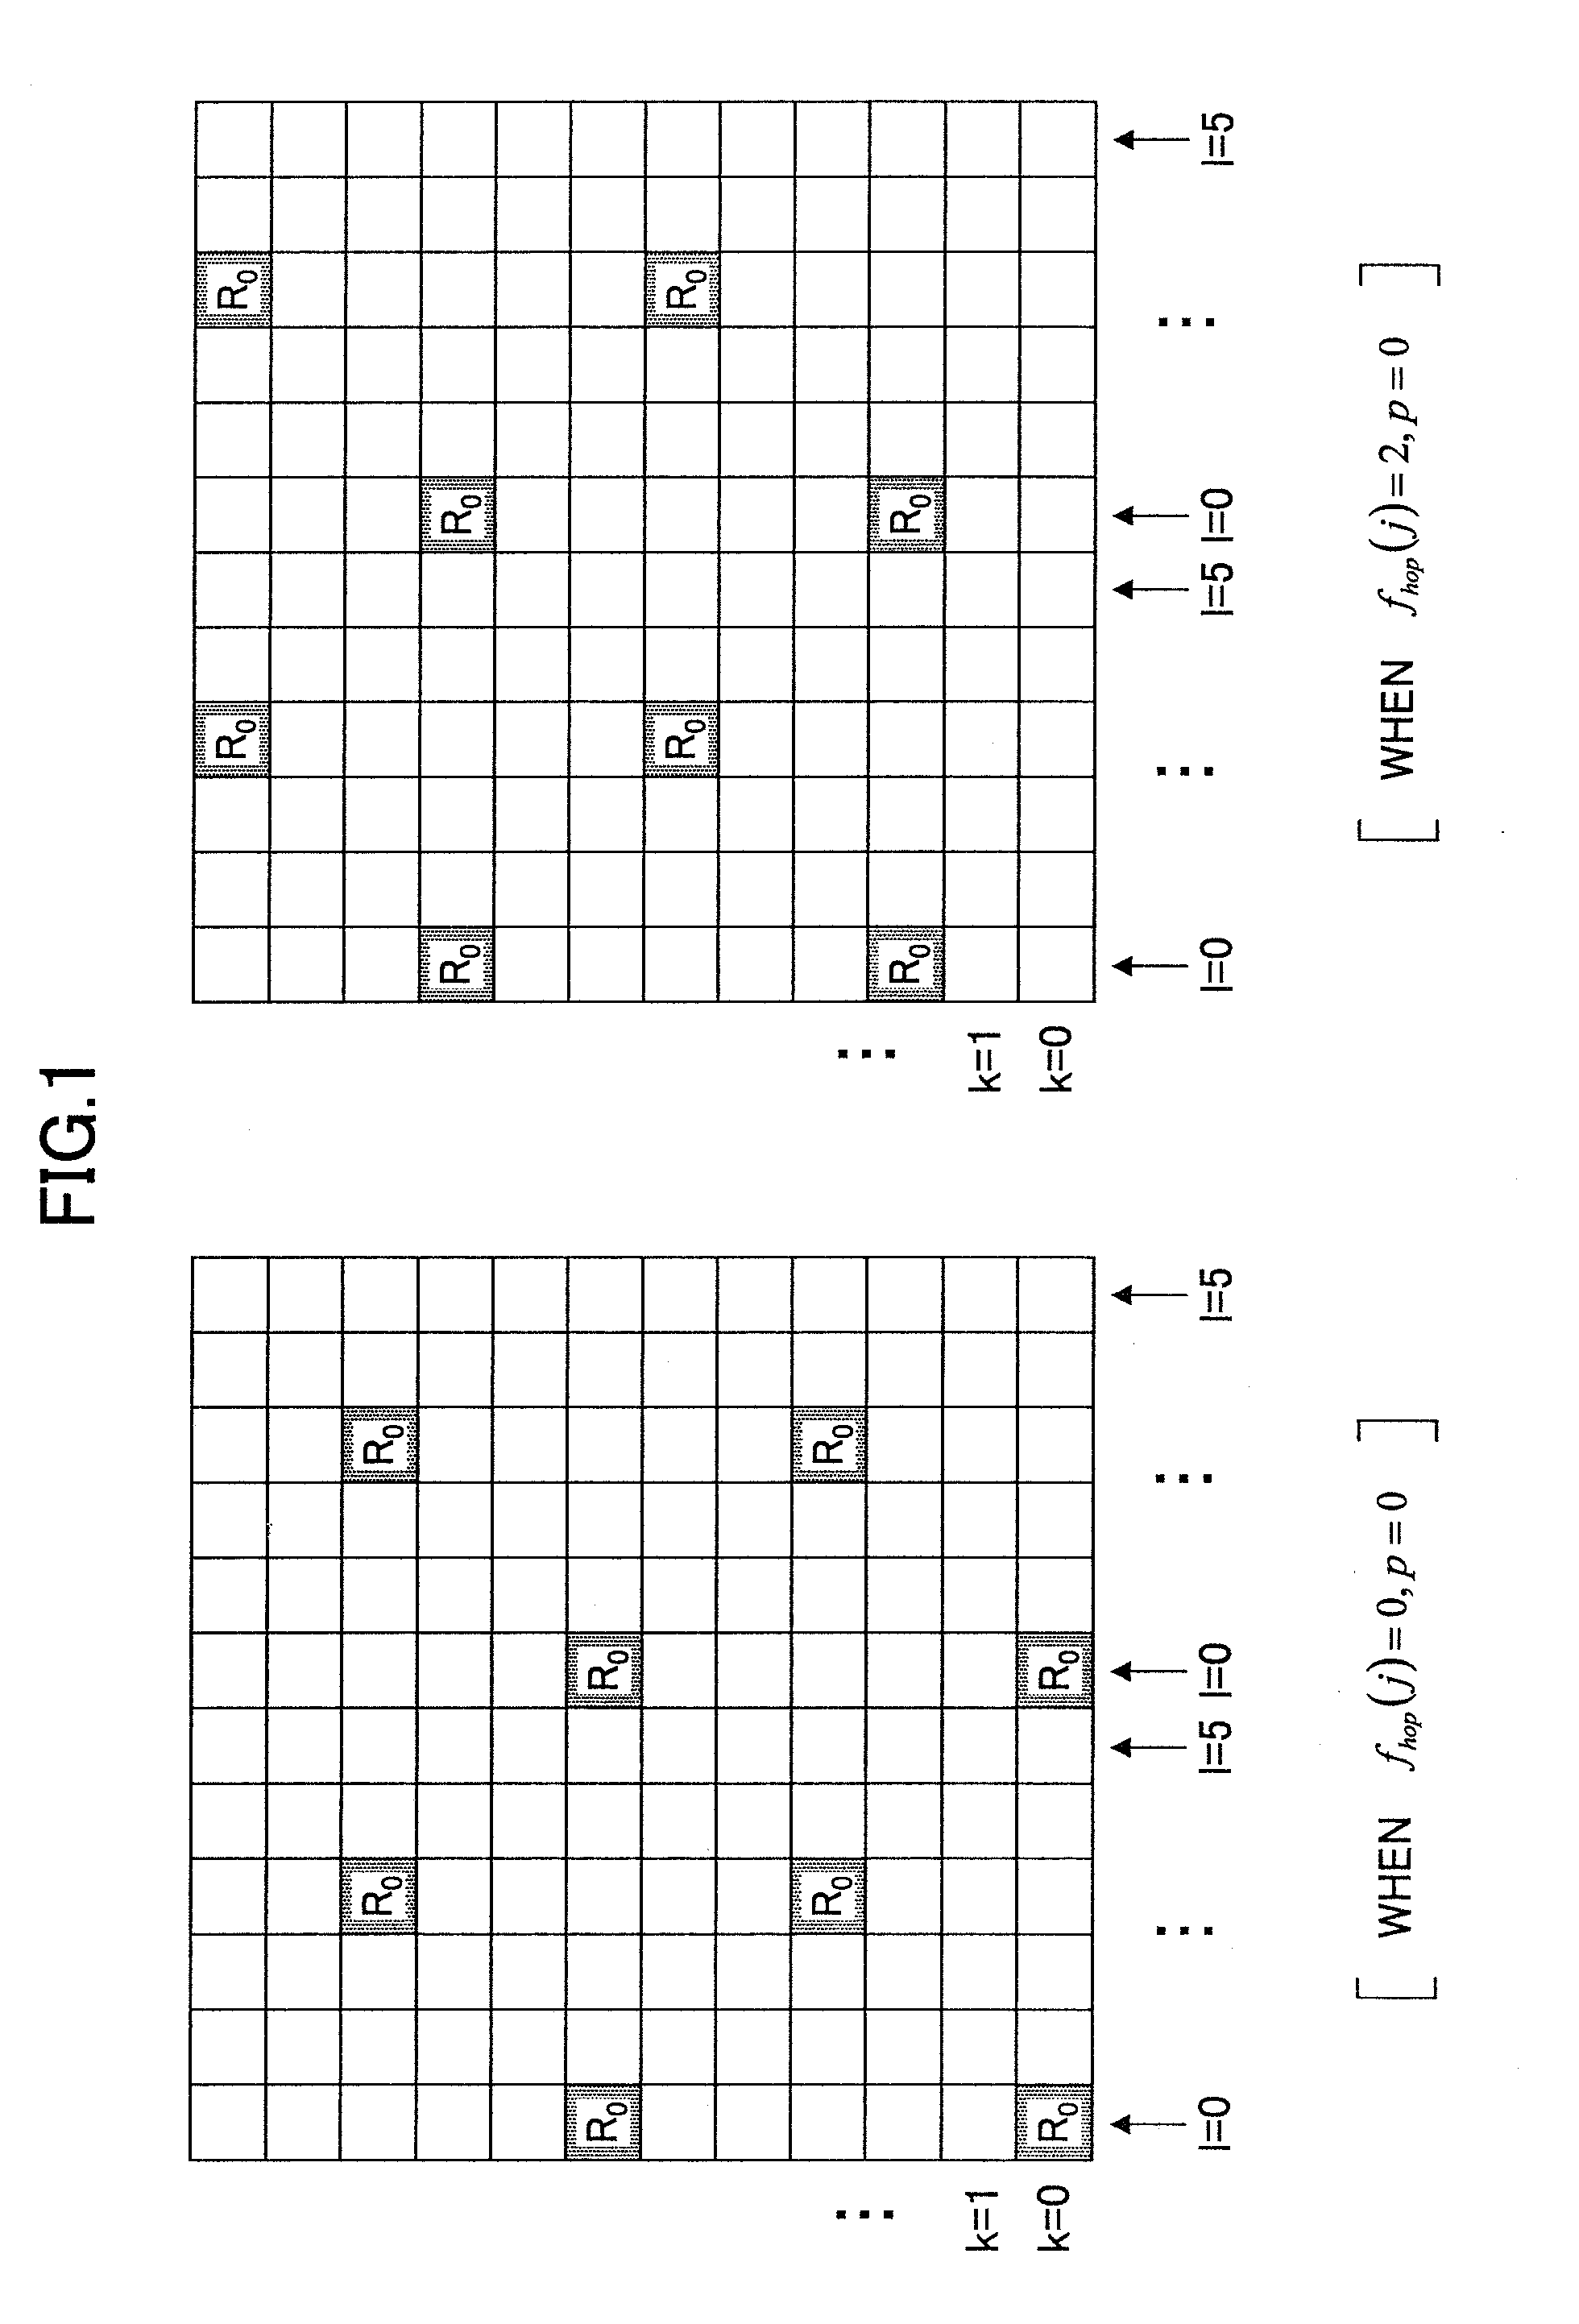 Maintaining a constant transmission power density of a data signal utilizing prohibited subcarriers